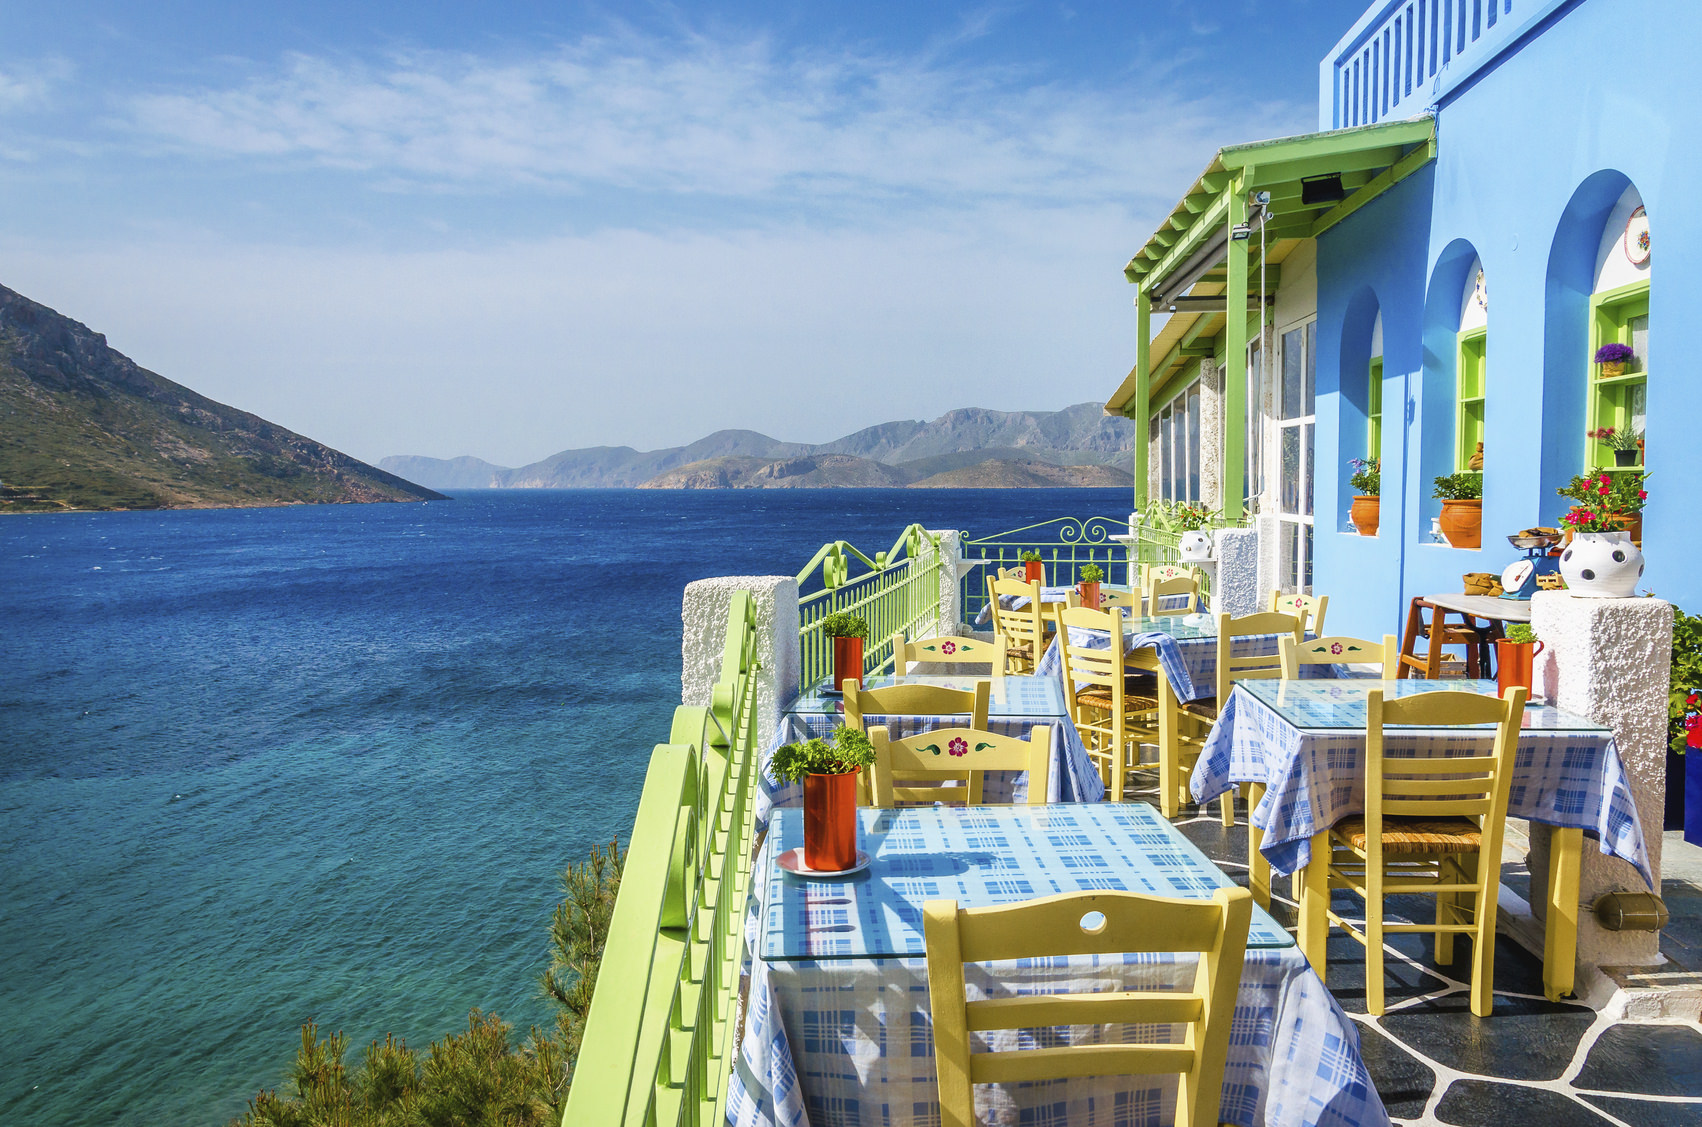 Typical Greek restaurant on the balcony blue building overlooking the sea, Greece